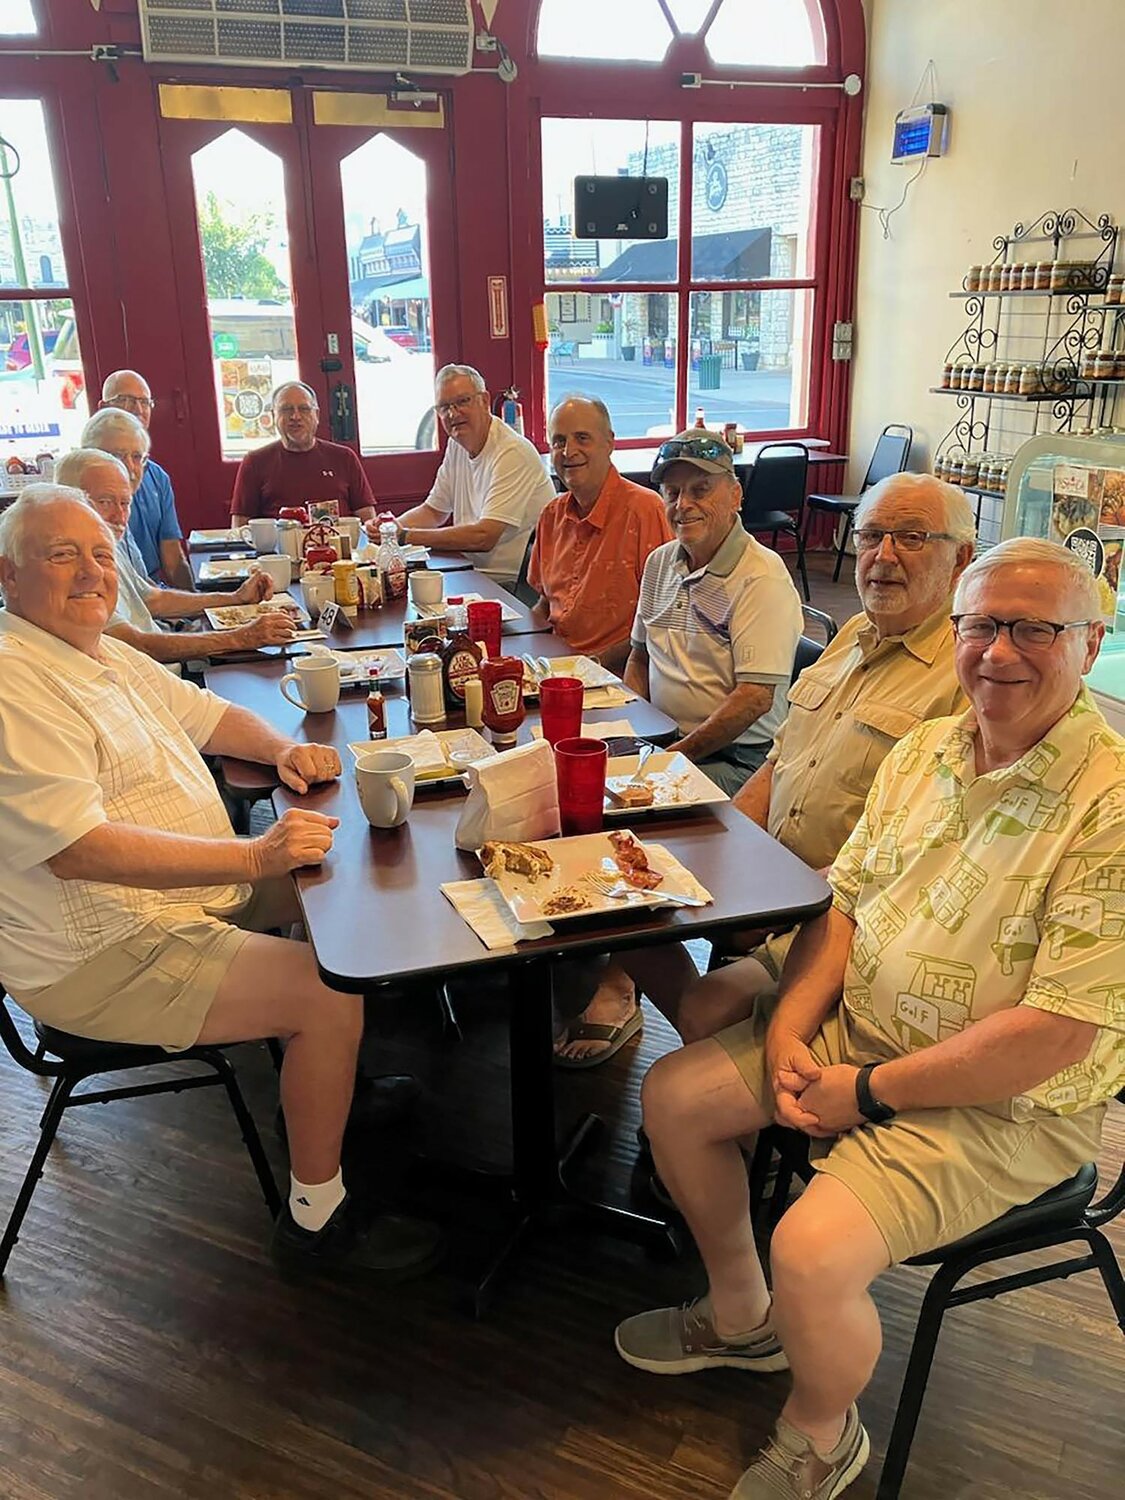 Every Sunday morning, Solid Rock Global Methodist Church hosts Sunday school at 9 a.m. and worship at 10 a.m. A women’s bible study meets on Wednesdays at 10 a.m. at Caraway’s garage on Pearl St, while a men’s bible study — that was recently formed — meets every Wednesday at 6:30 p.m. at Caraway’s Garage on Pearl St.